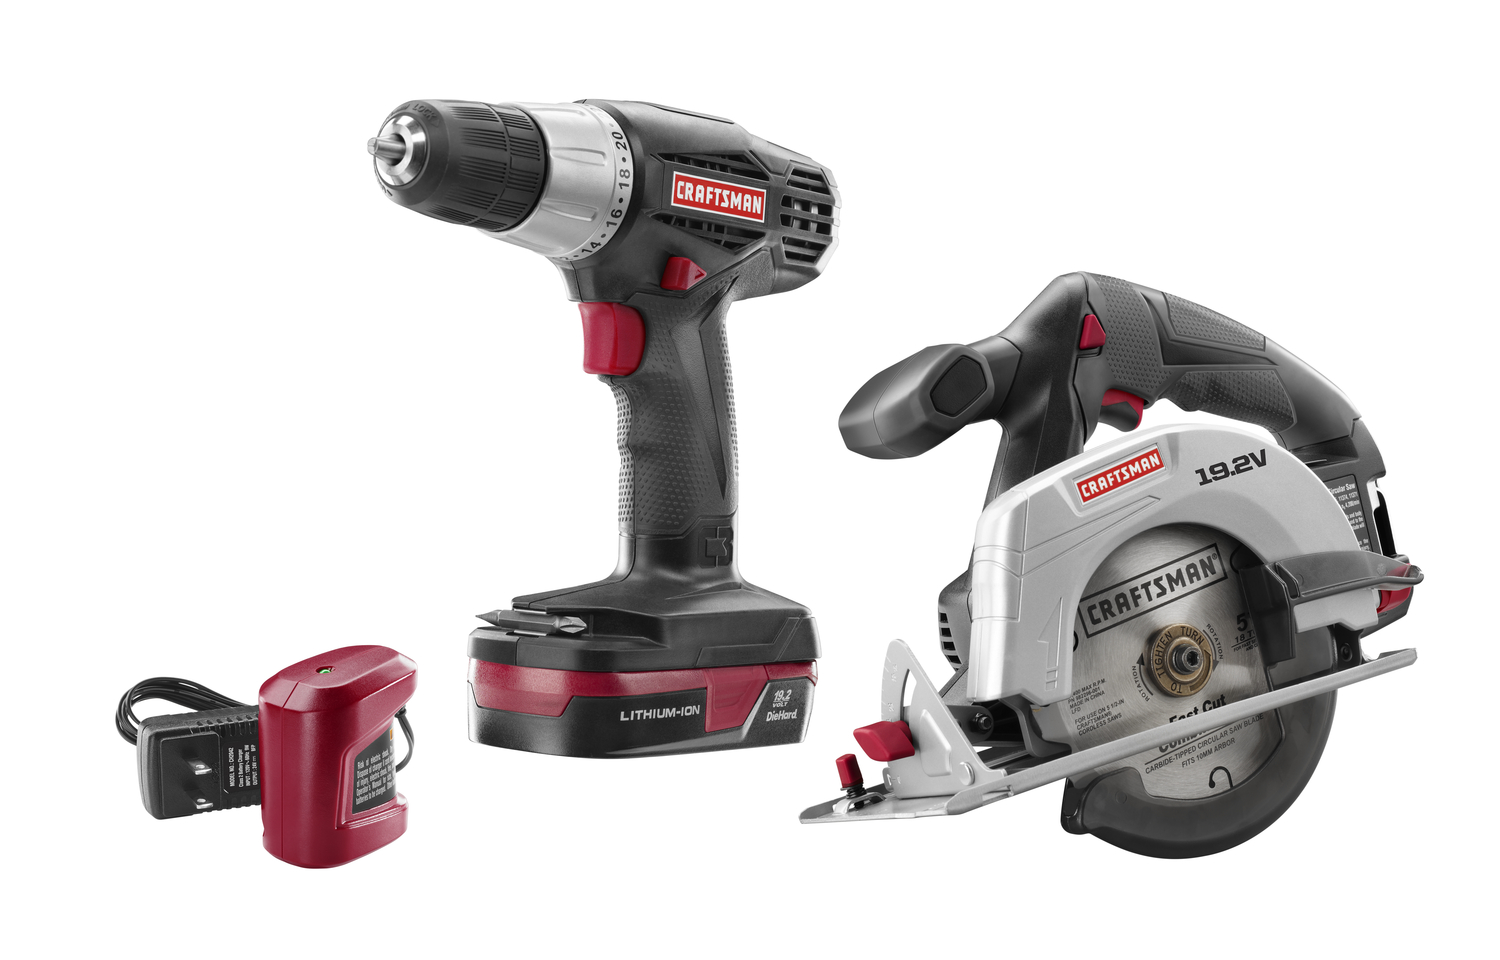 Craftsman Lithum Ion Cordless Drill and Circ Saw Set Only $79.99!